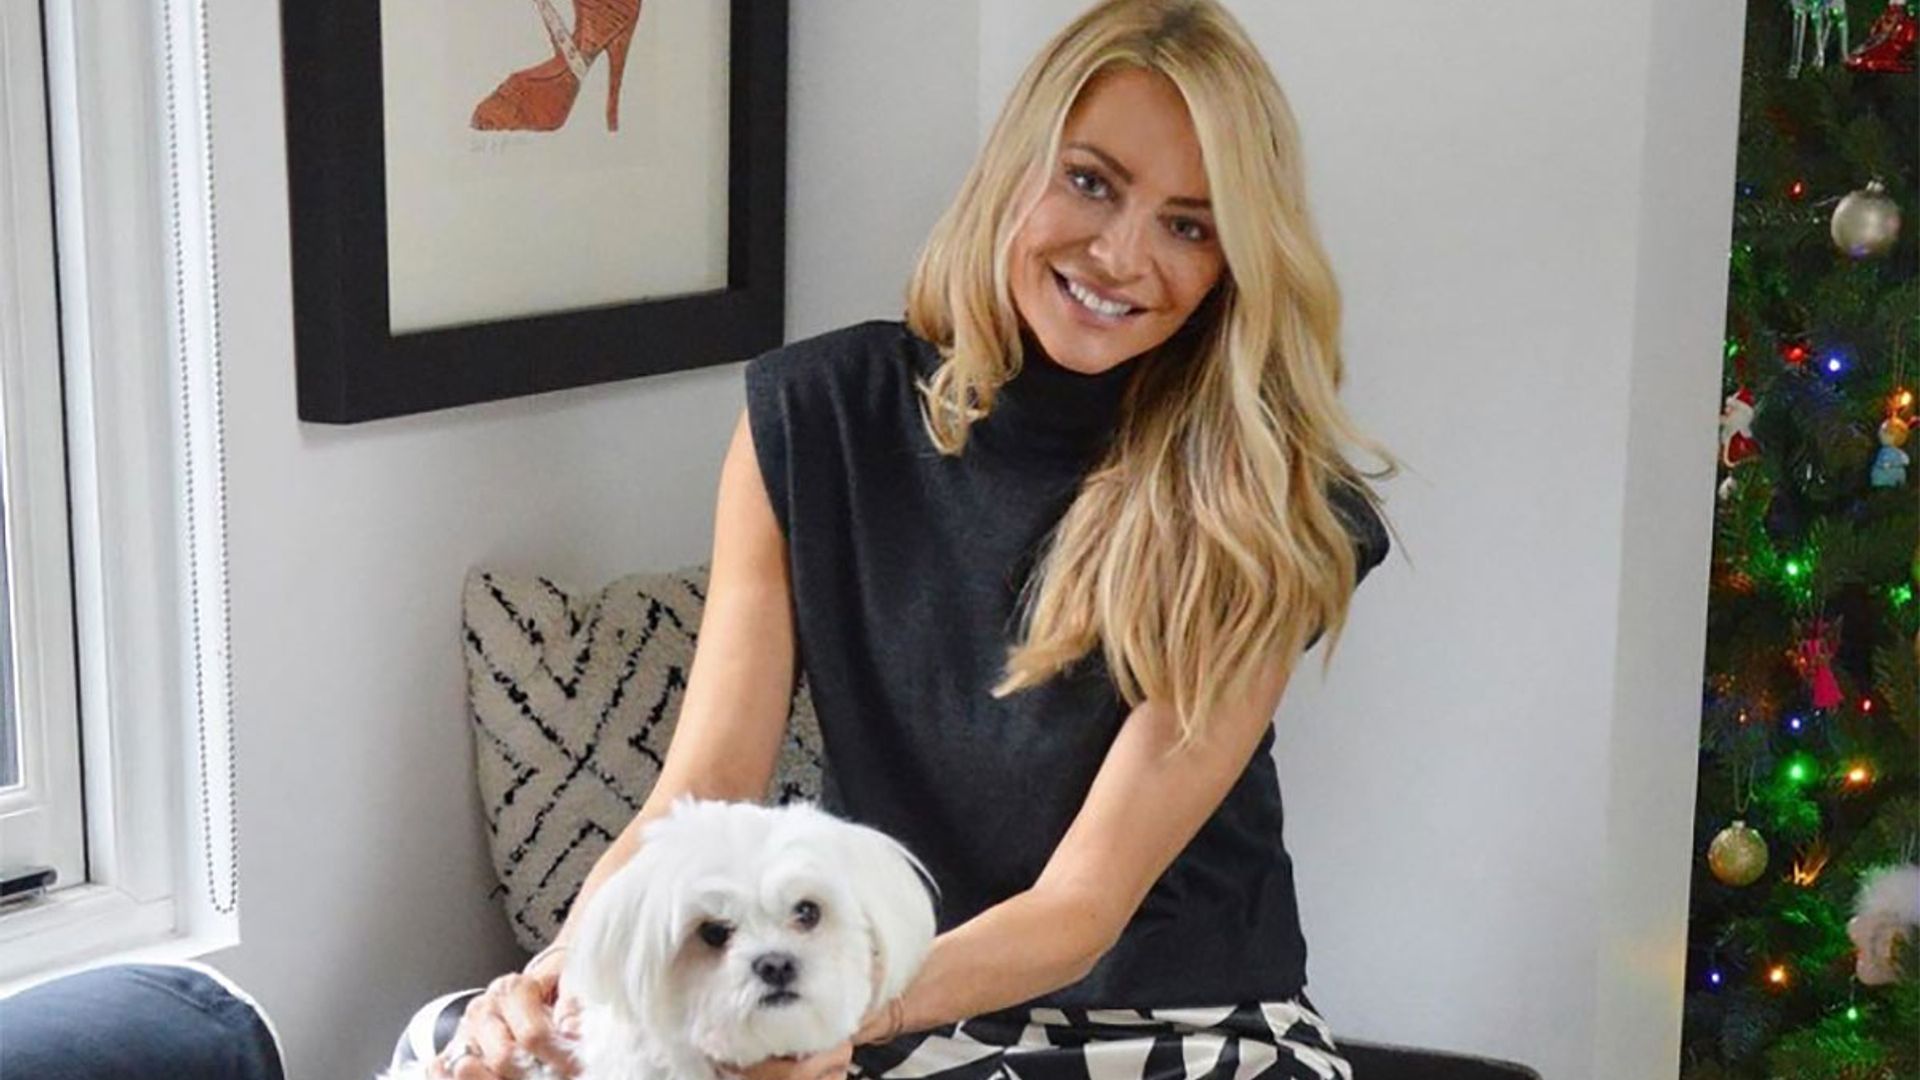 Tess Daly's fans are obsessed with her off-duty casual outfit at home